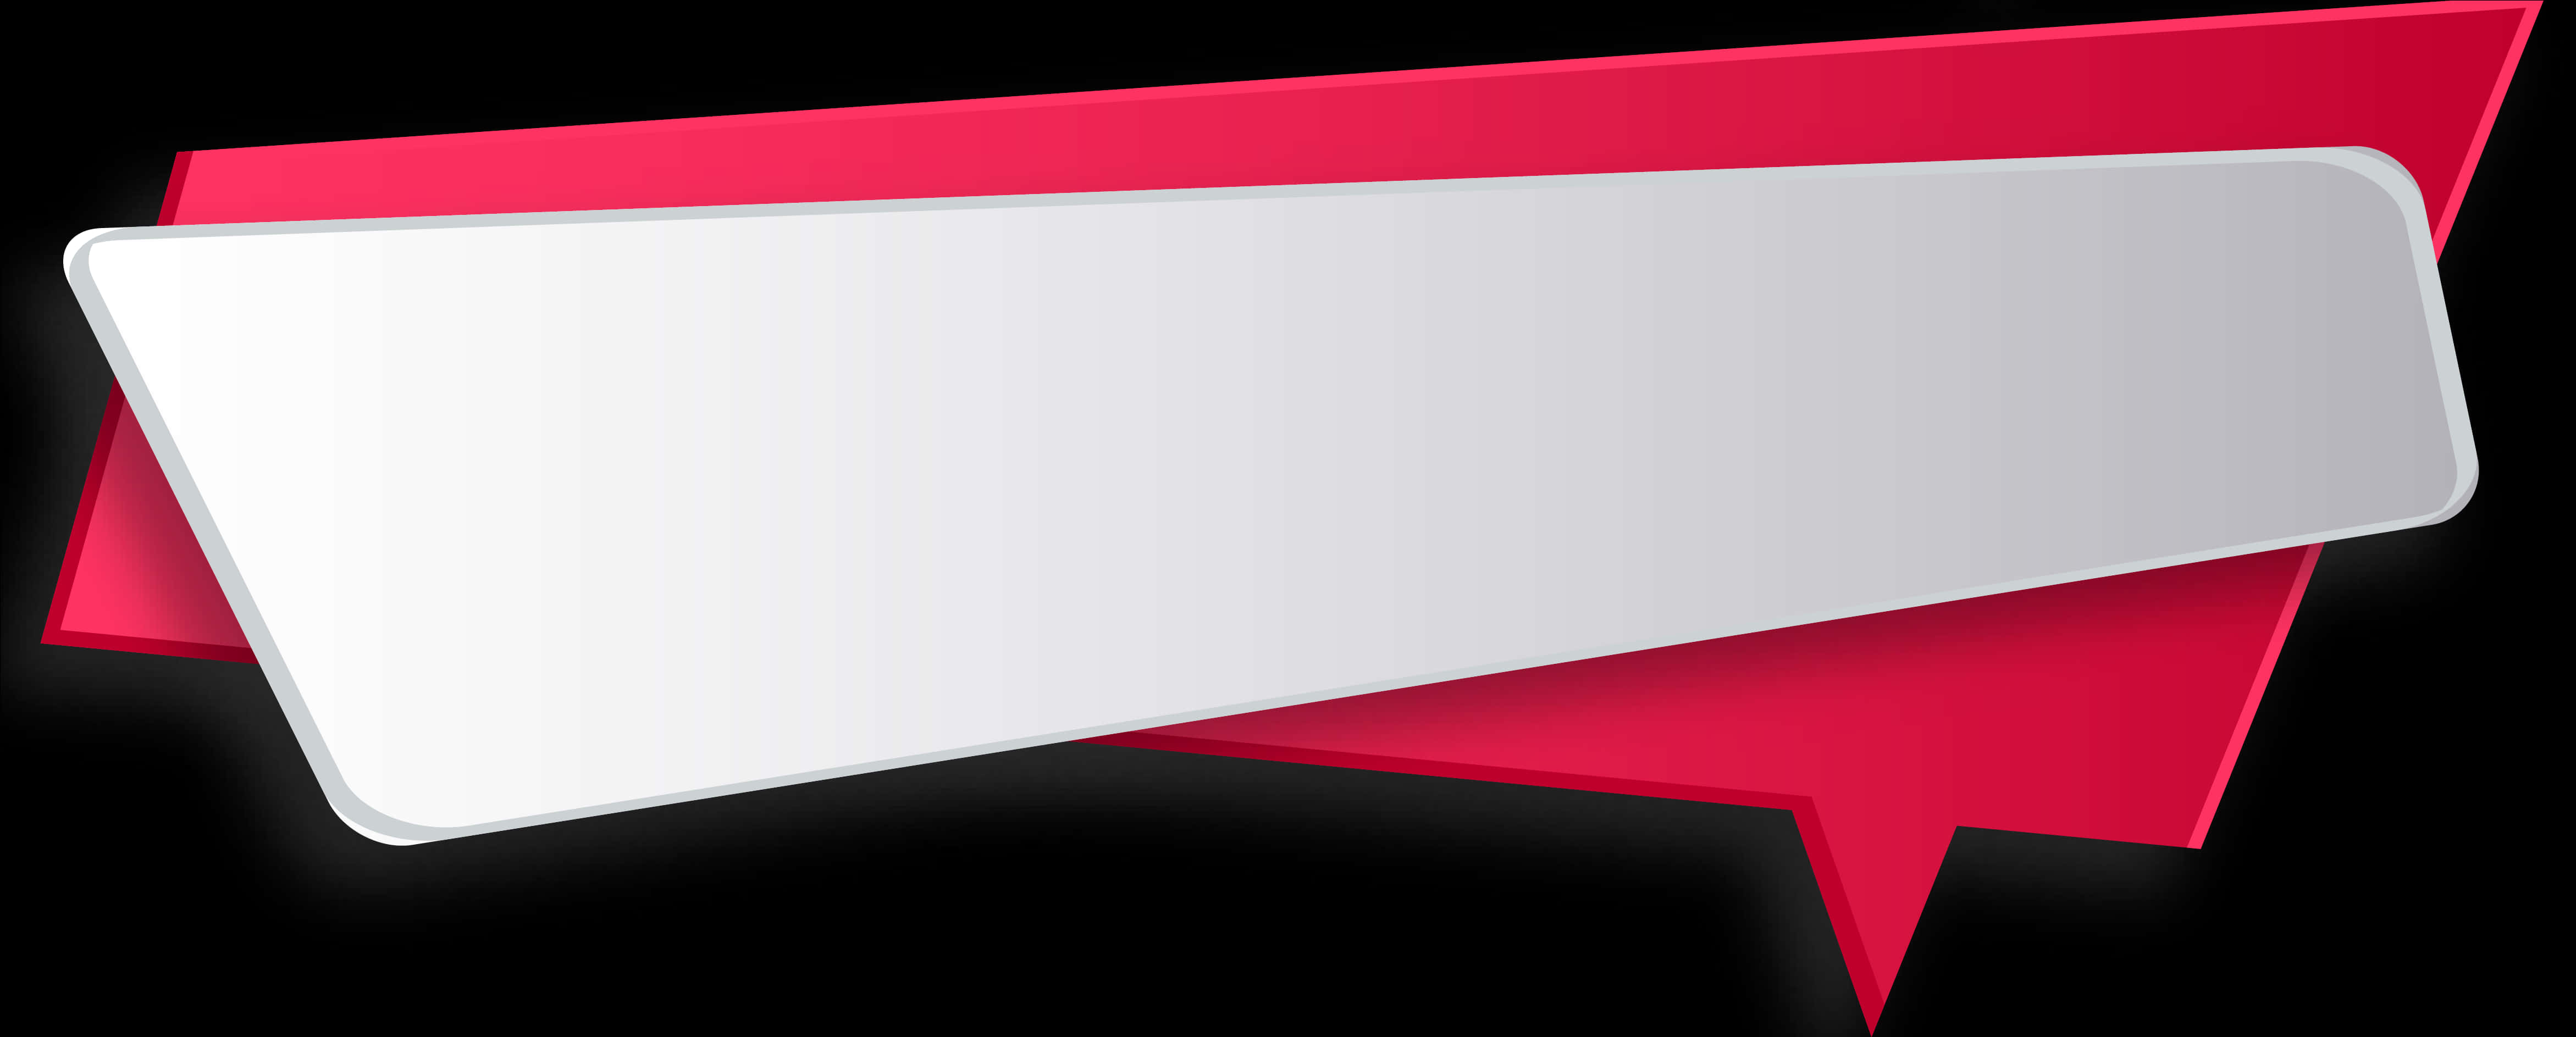 Abstract Redand White Banner Design PNG